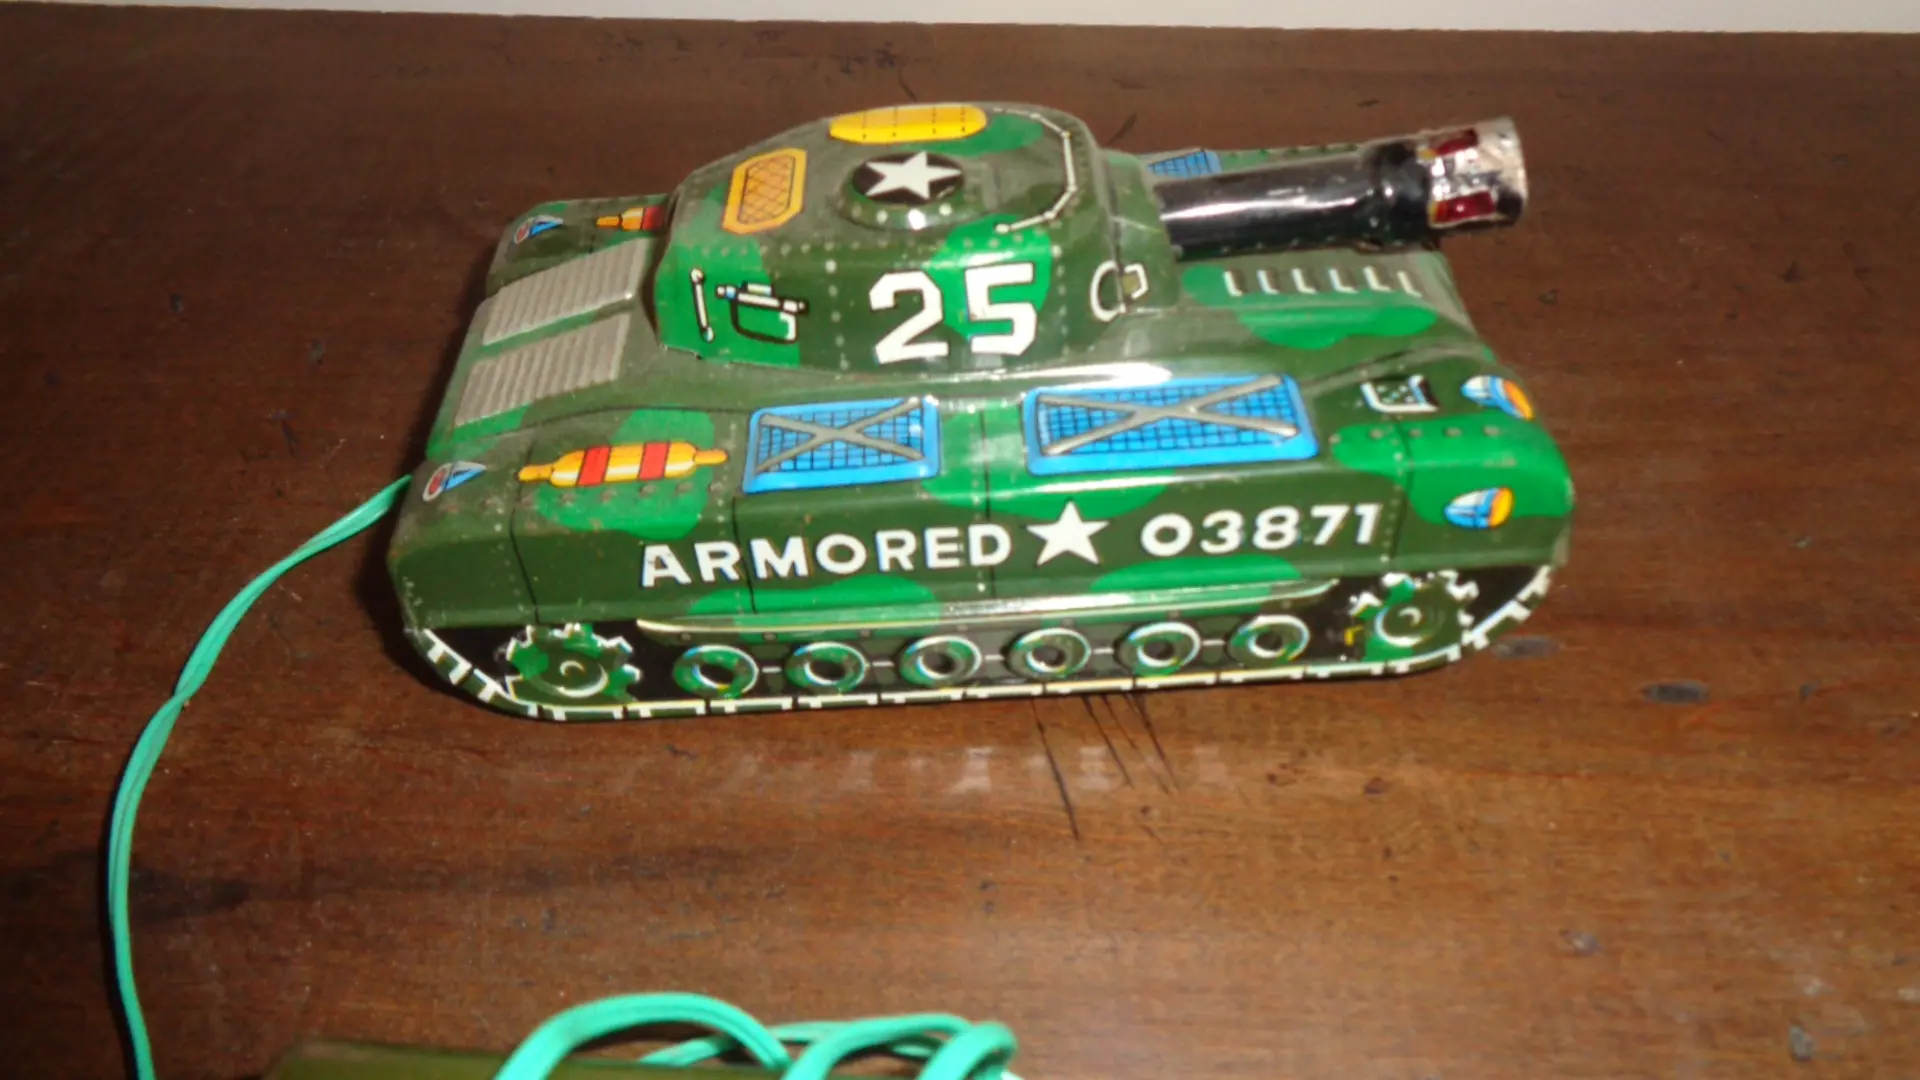 Green Vintage Military Tank showing Armored 03871 and wire